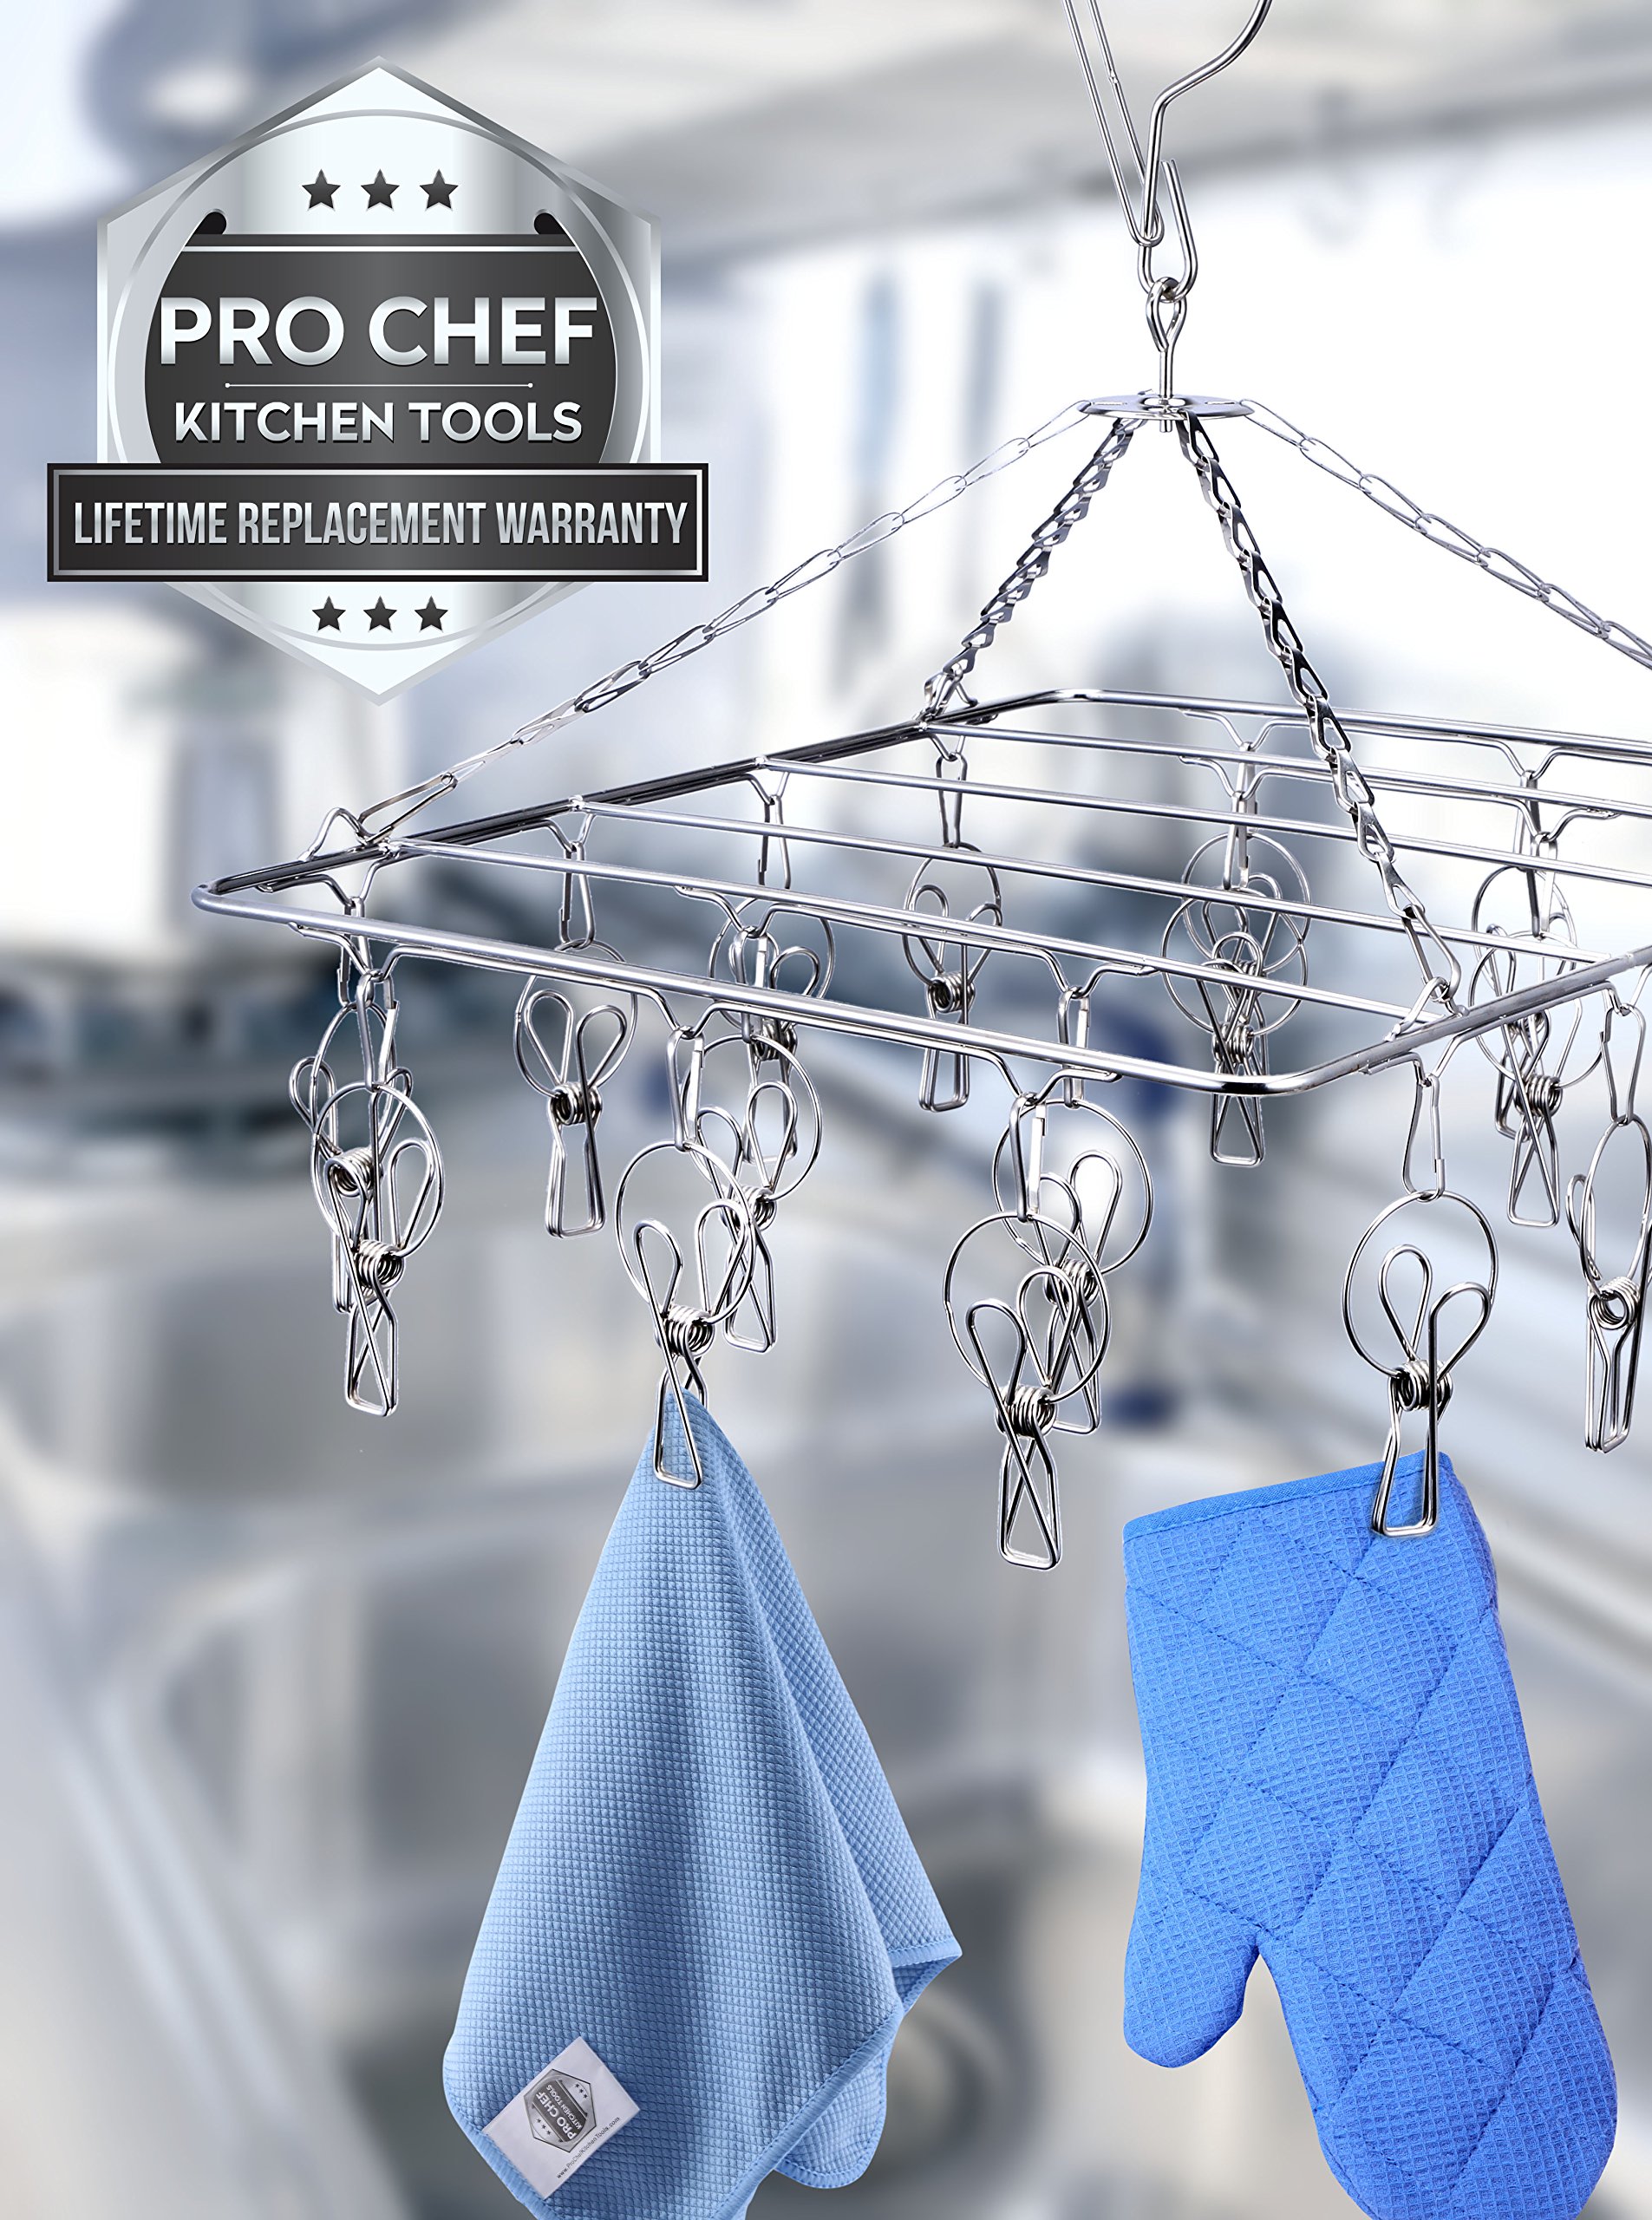 Pro Chef Kitchen Tools Laundry Drying Rack - Rectangle Hanging Clothes Dryer with 18 Clothes Pins - Hangers with Clips - Retractable Clothesline - Mitten Drying Rack - Indoor Outdoor Laundry Hanger